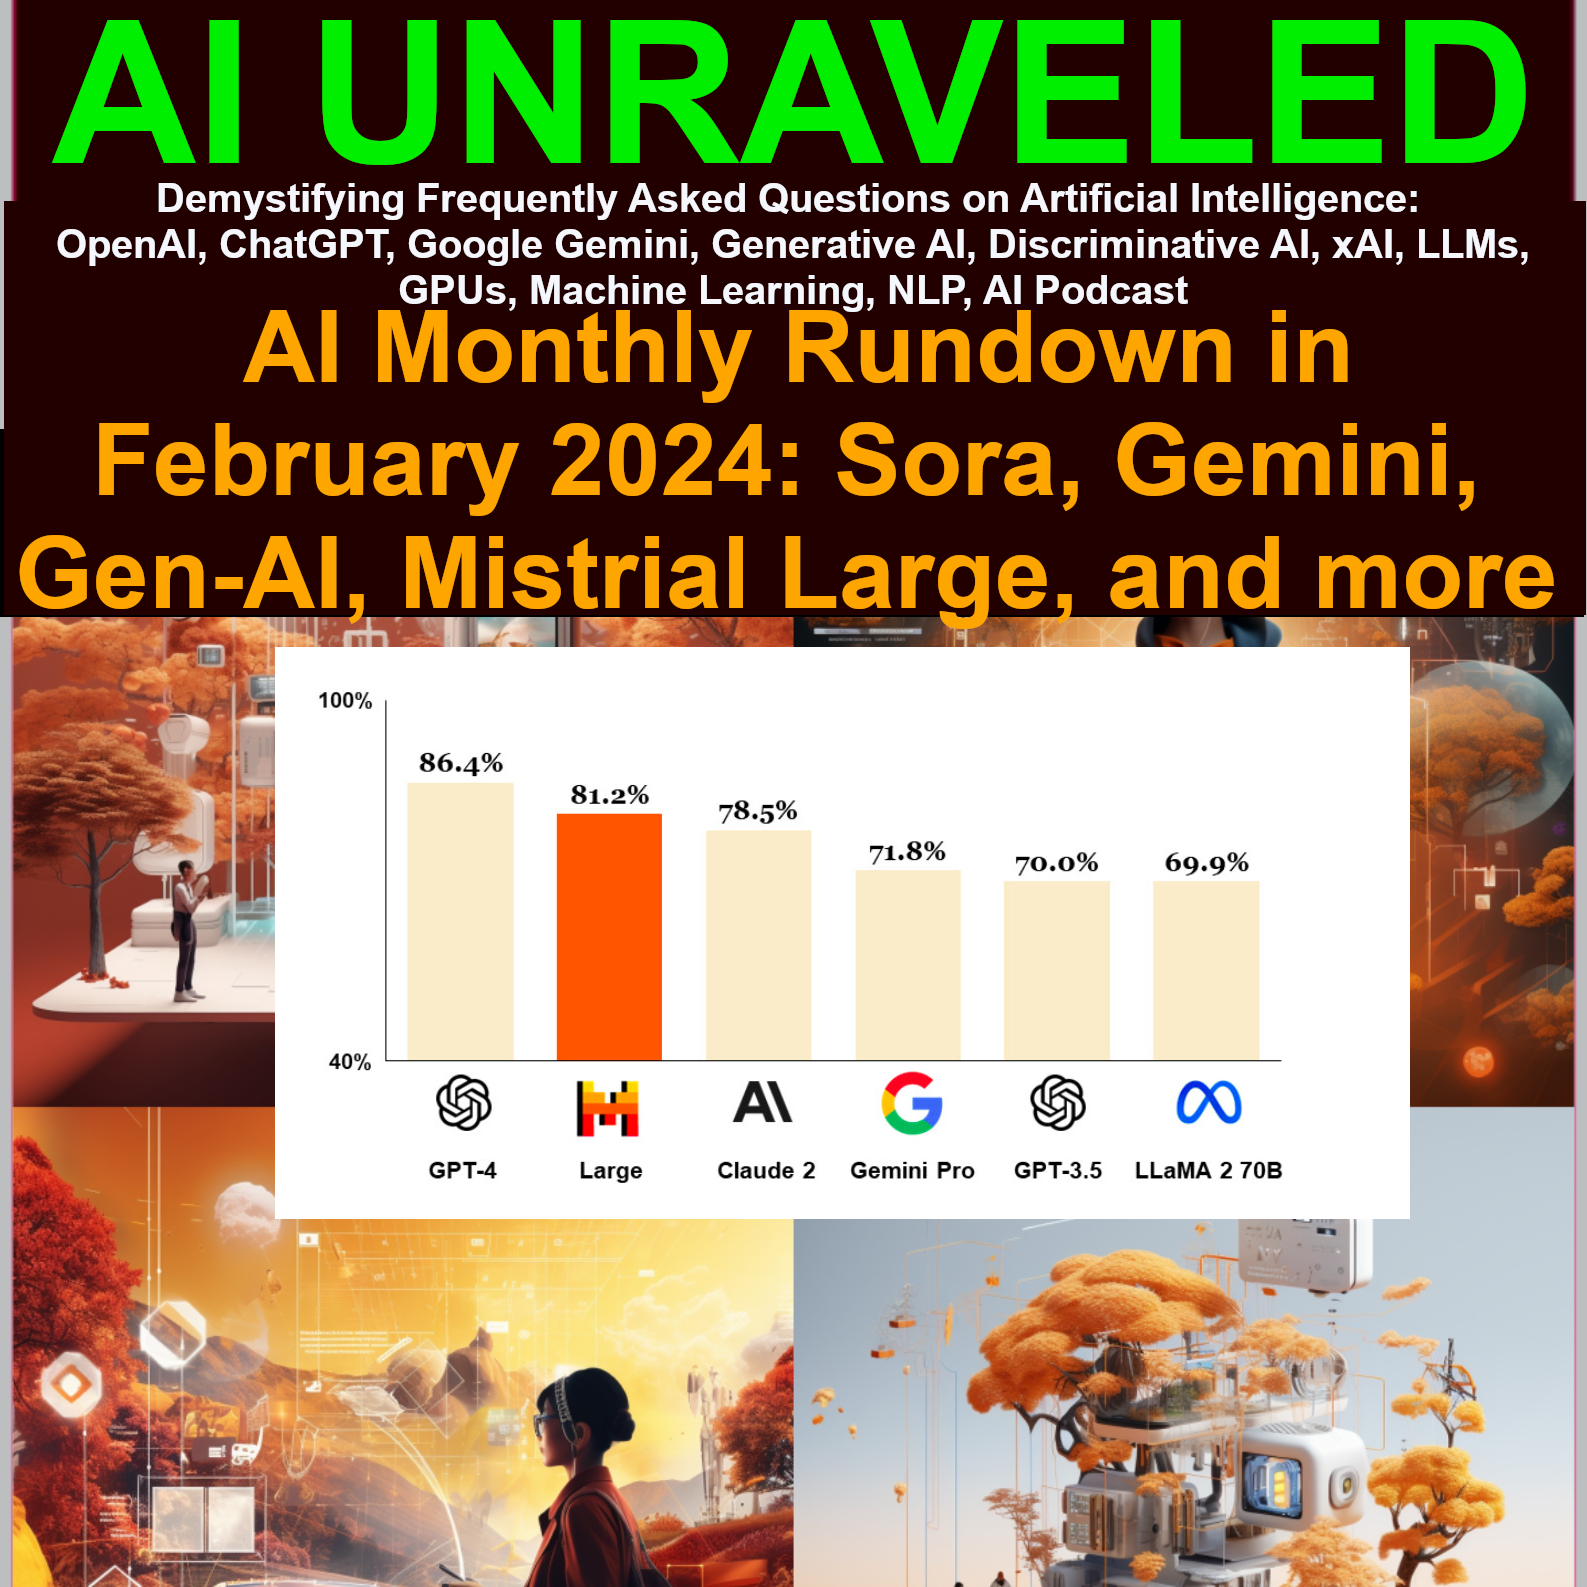 AI Monthly Rundown in February 2024: New AI Models and Advancements - Mistral Large, DeepMind's Gen-AI, Meta's MobileLLM, Tesla's Robot, OpenAI's Sora, and More!